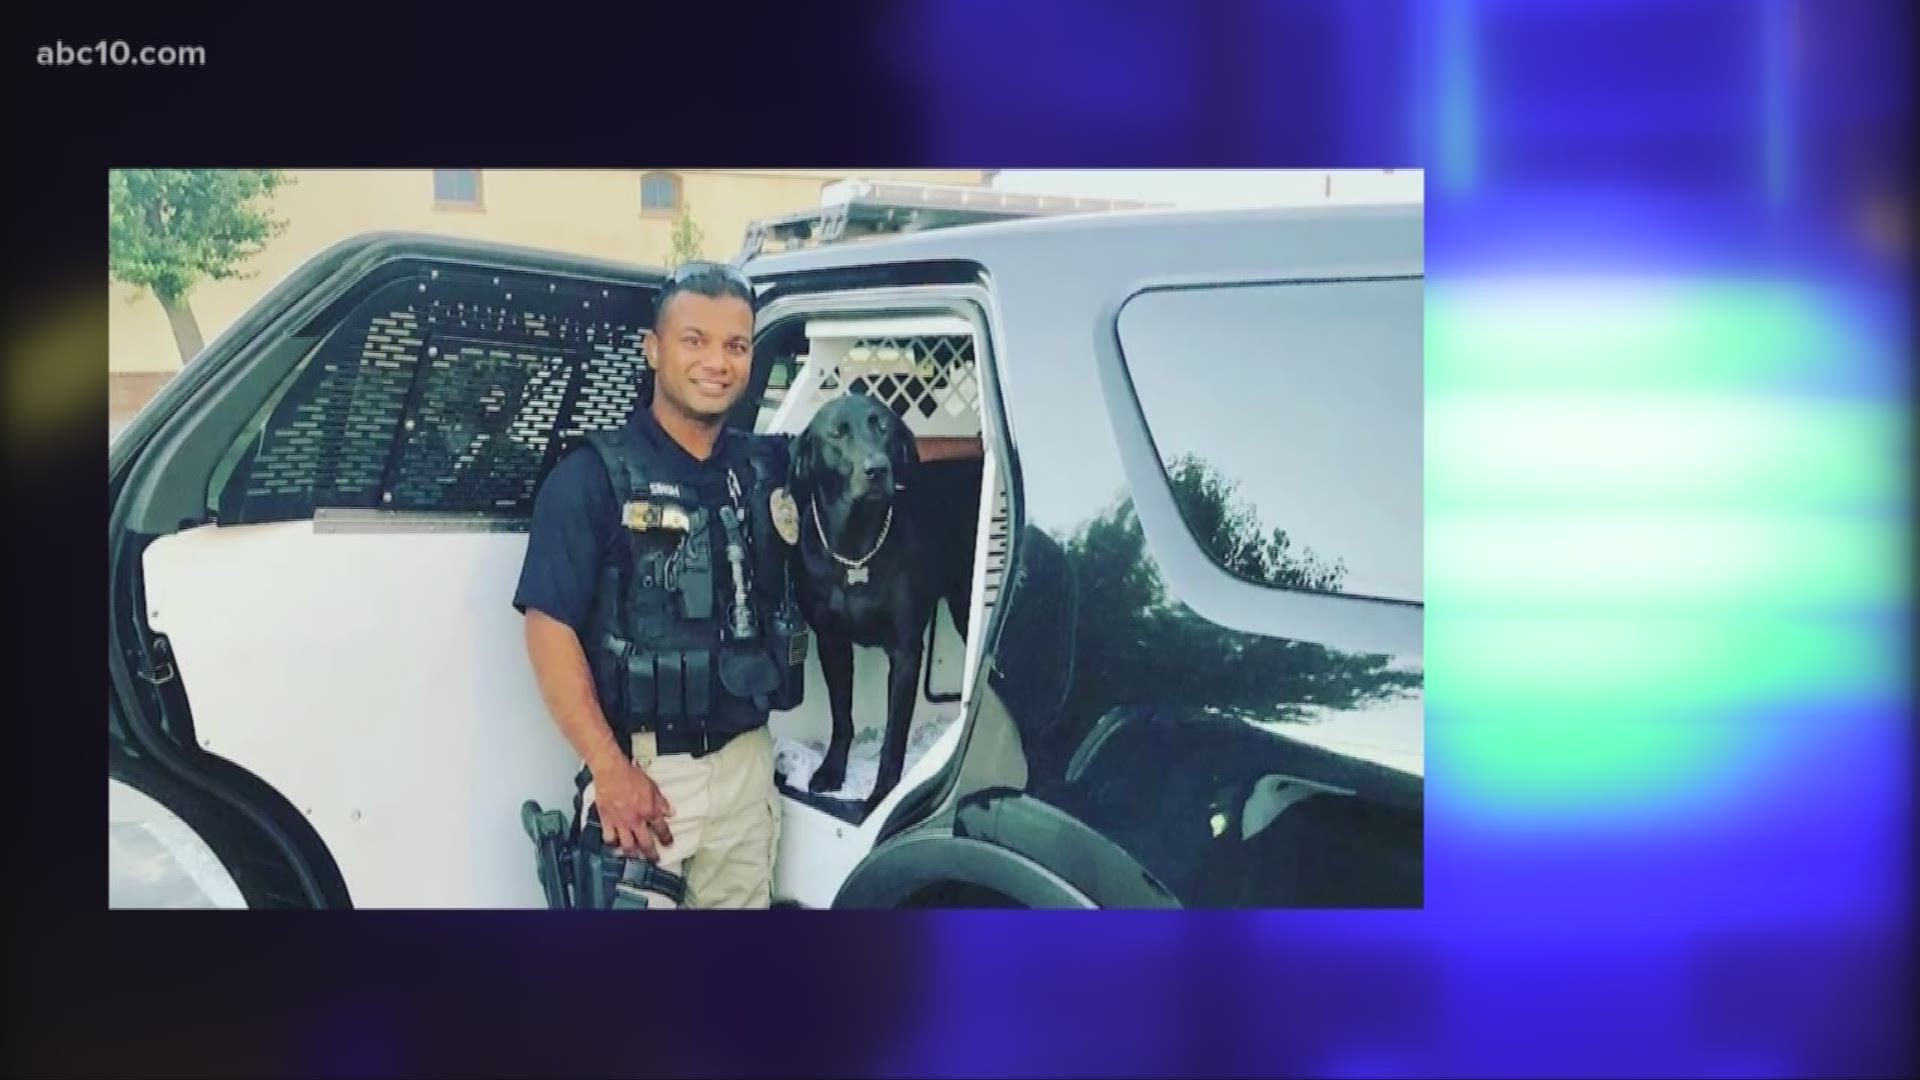 The search for the man who killed Newman police officer Ronil Singh continues.